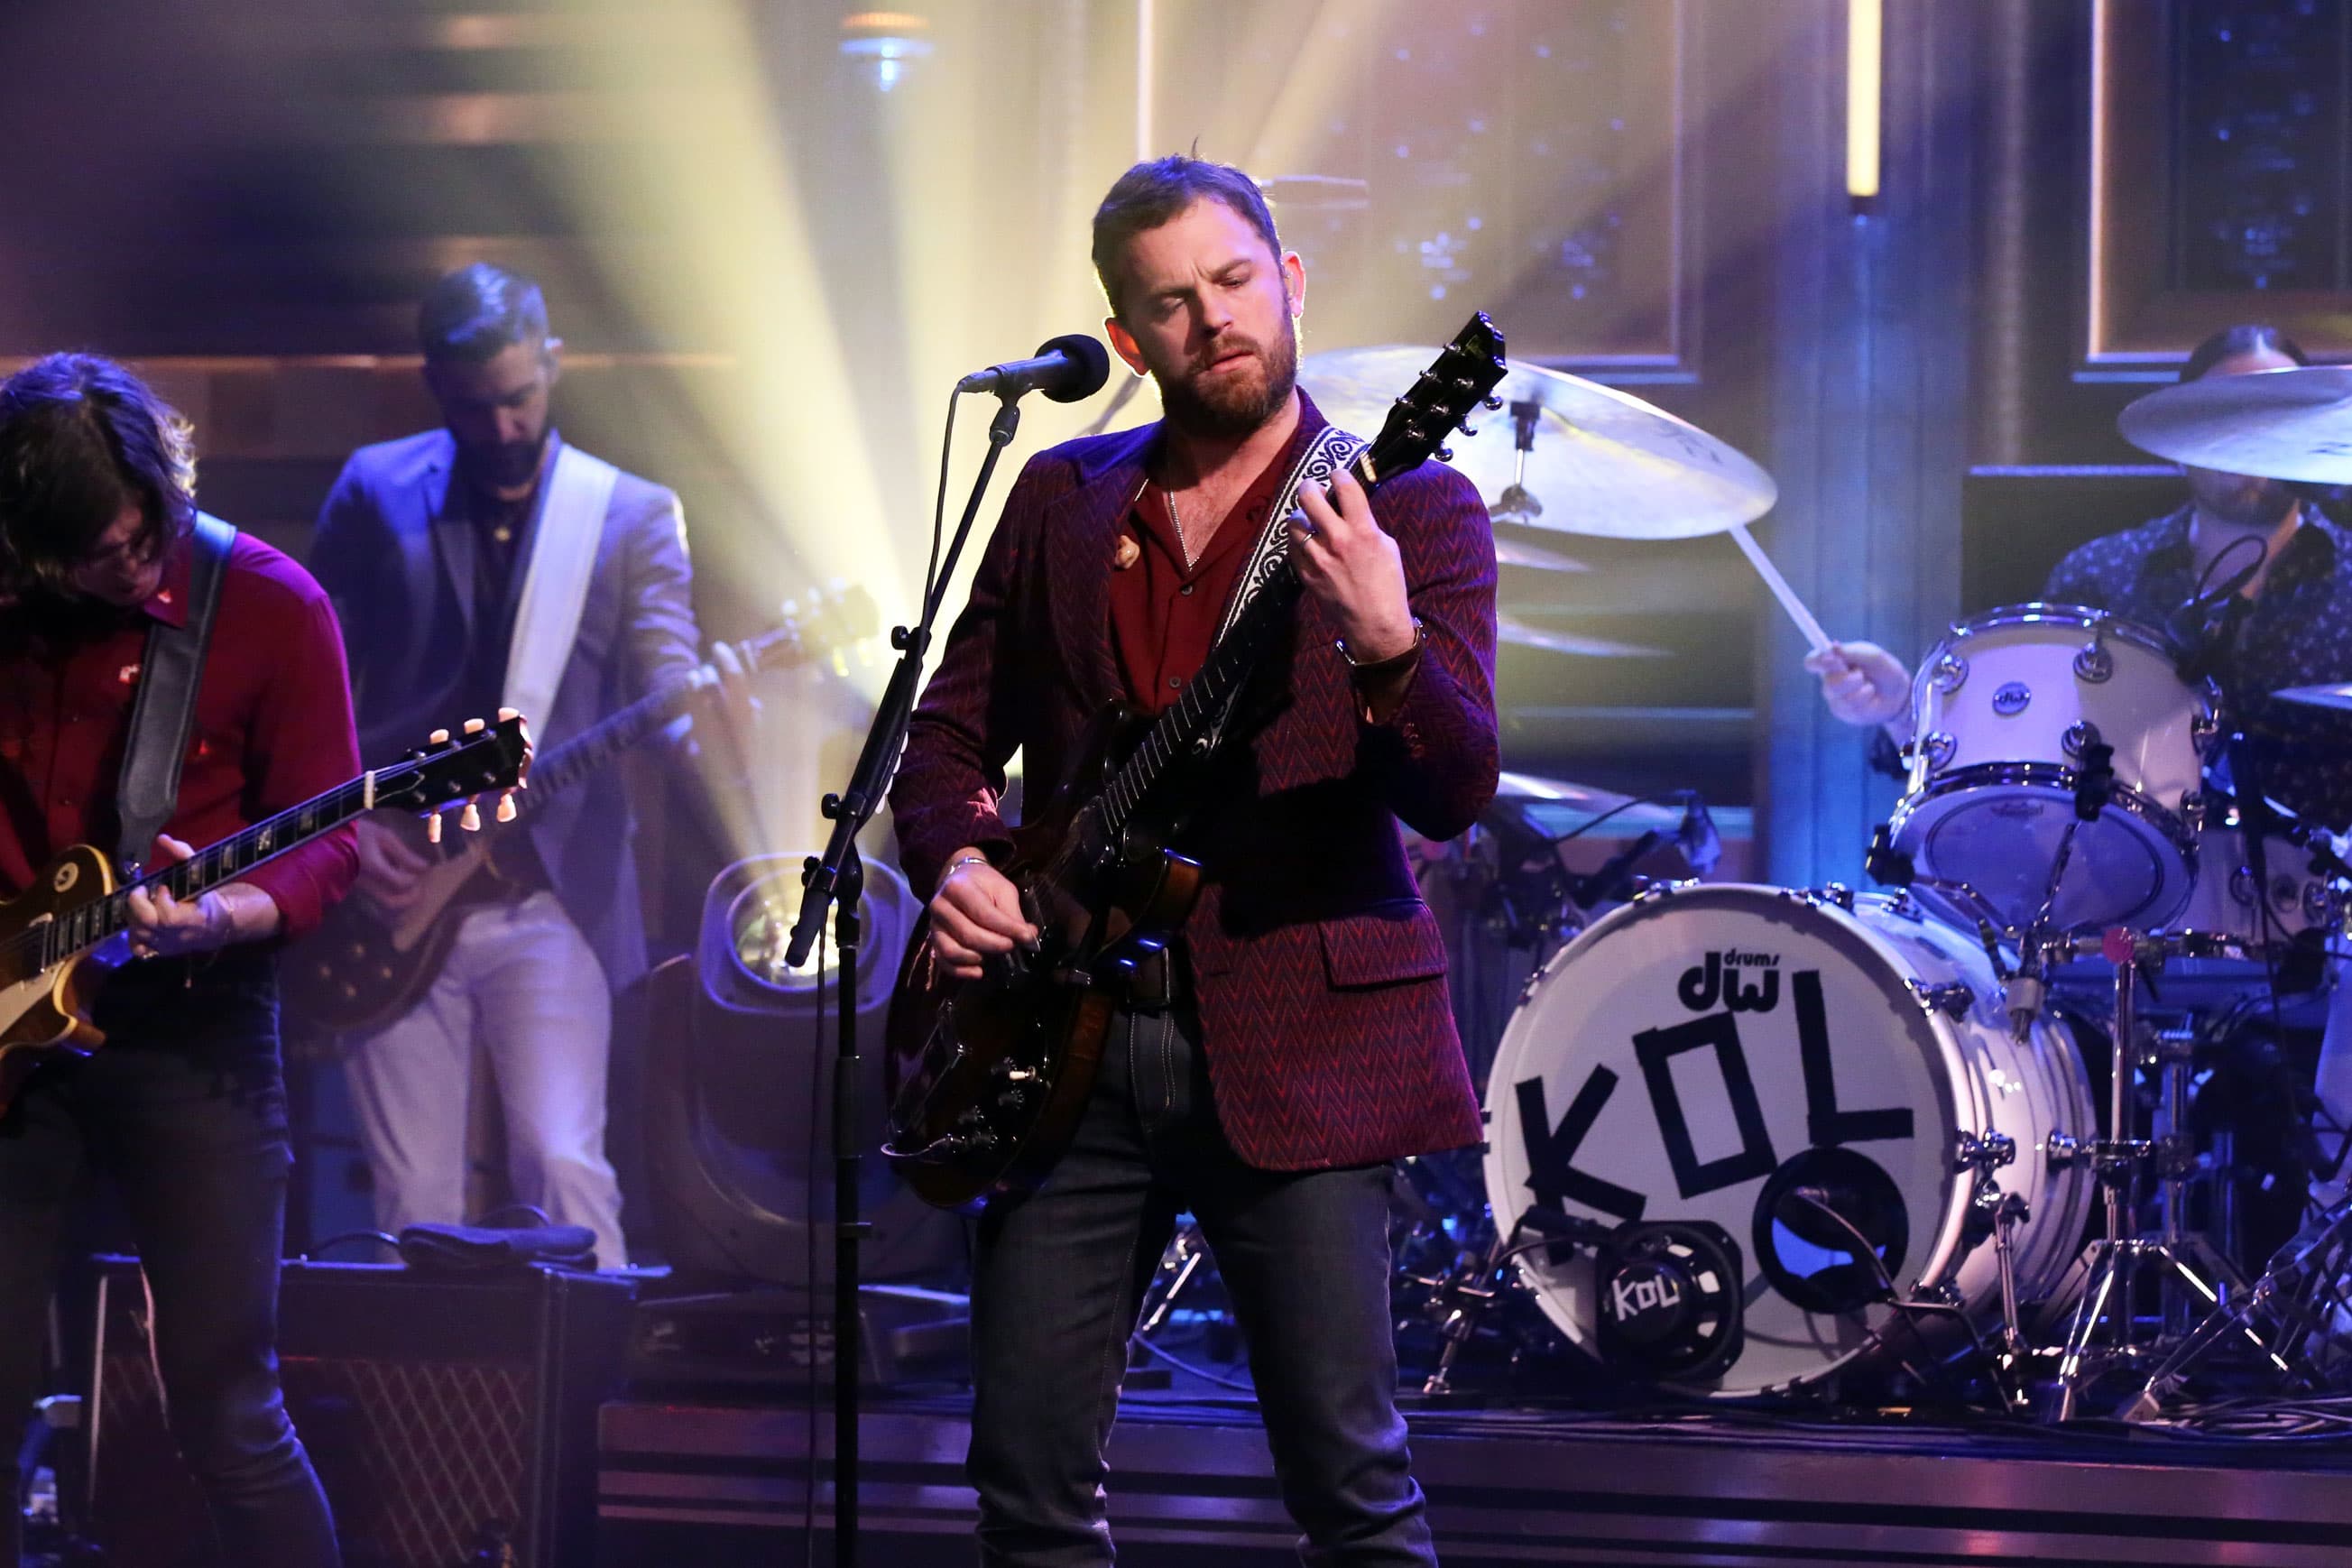 Rock band Kings of Leon will release new album as an NFT, making it a digital collector's item - CNBC